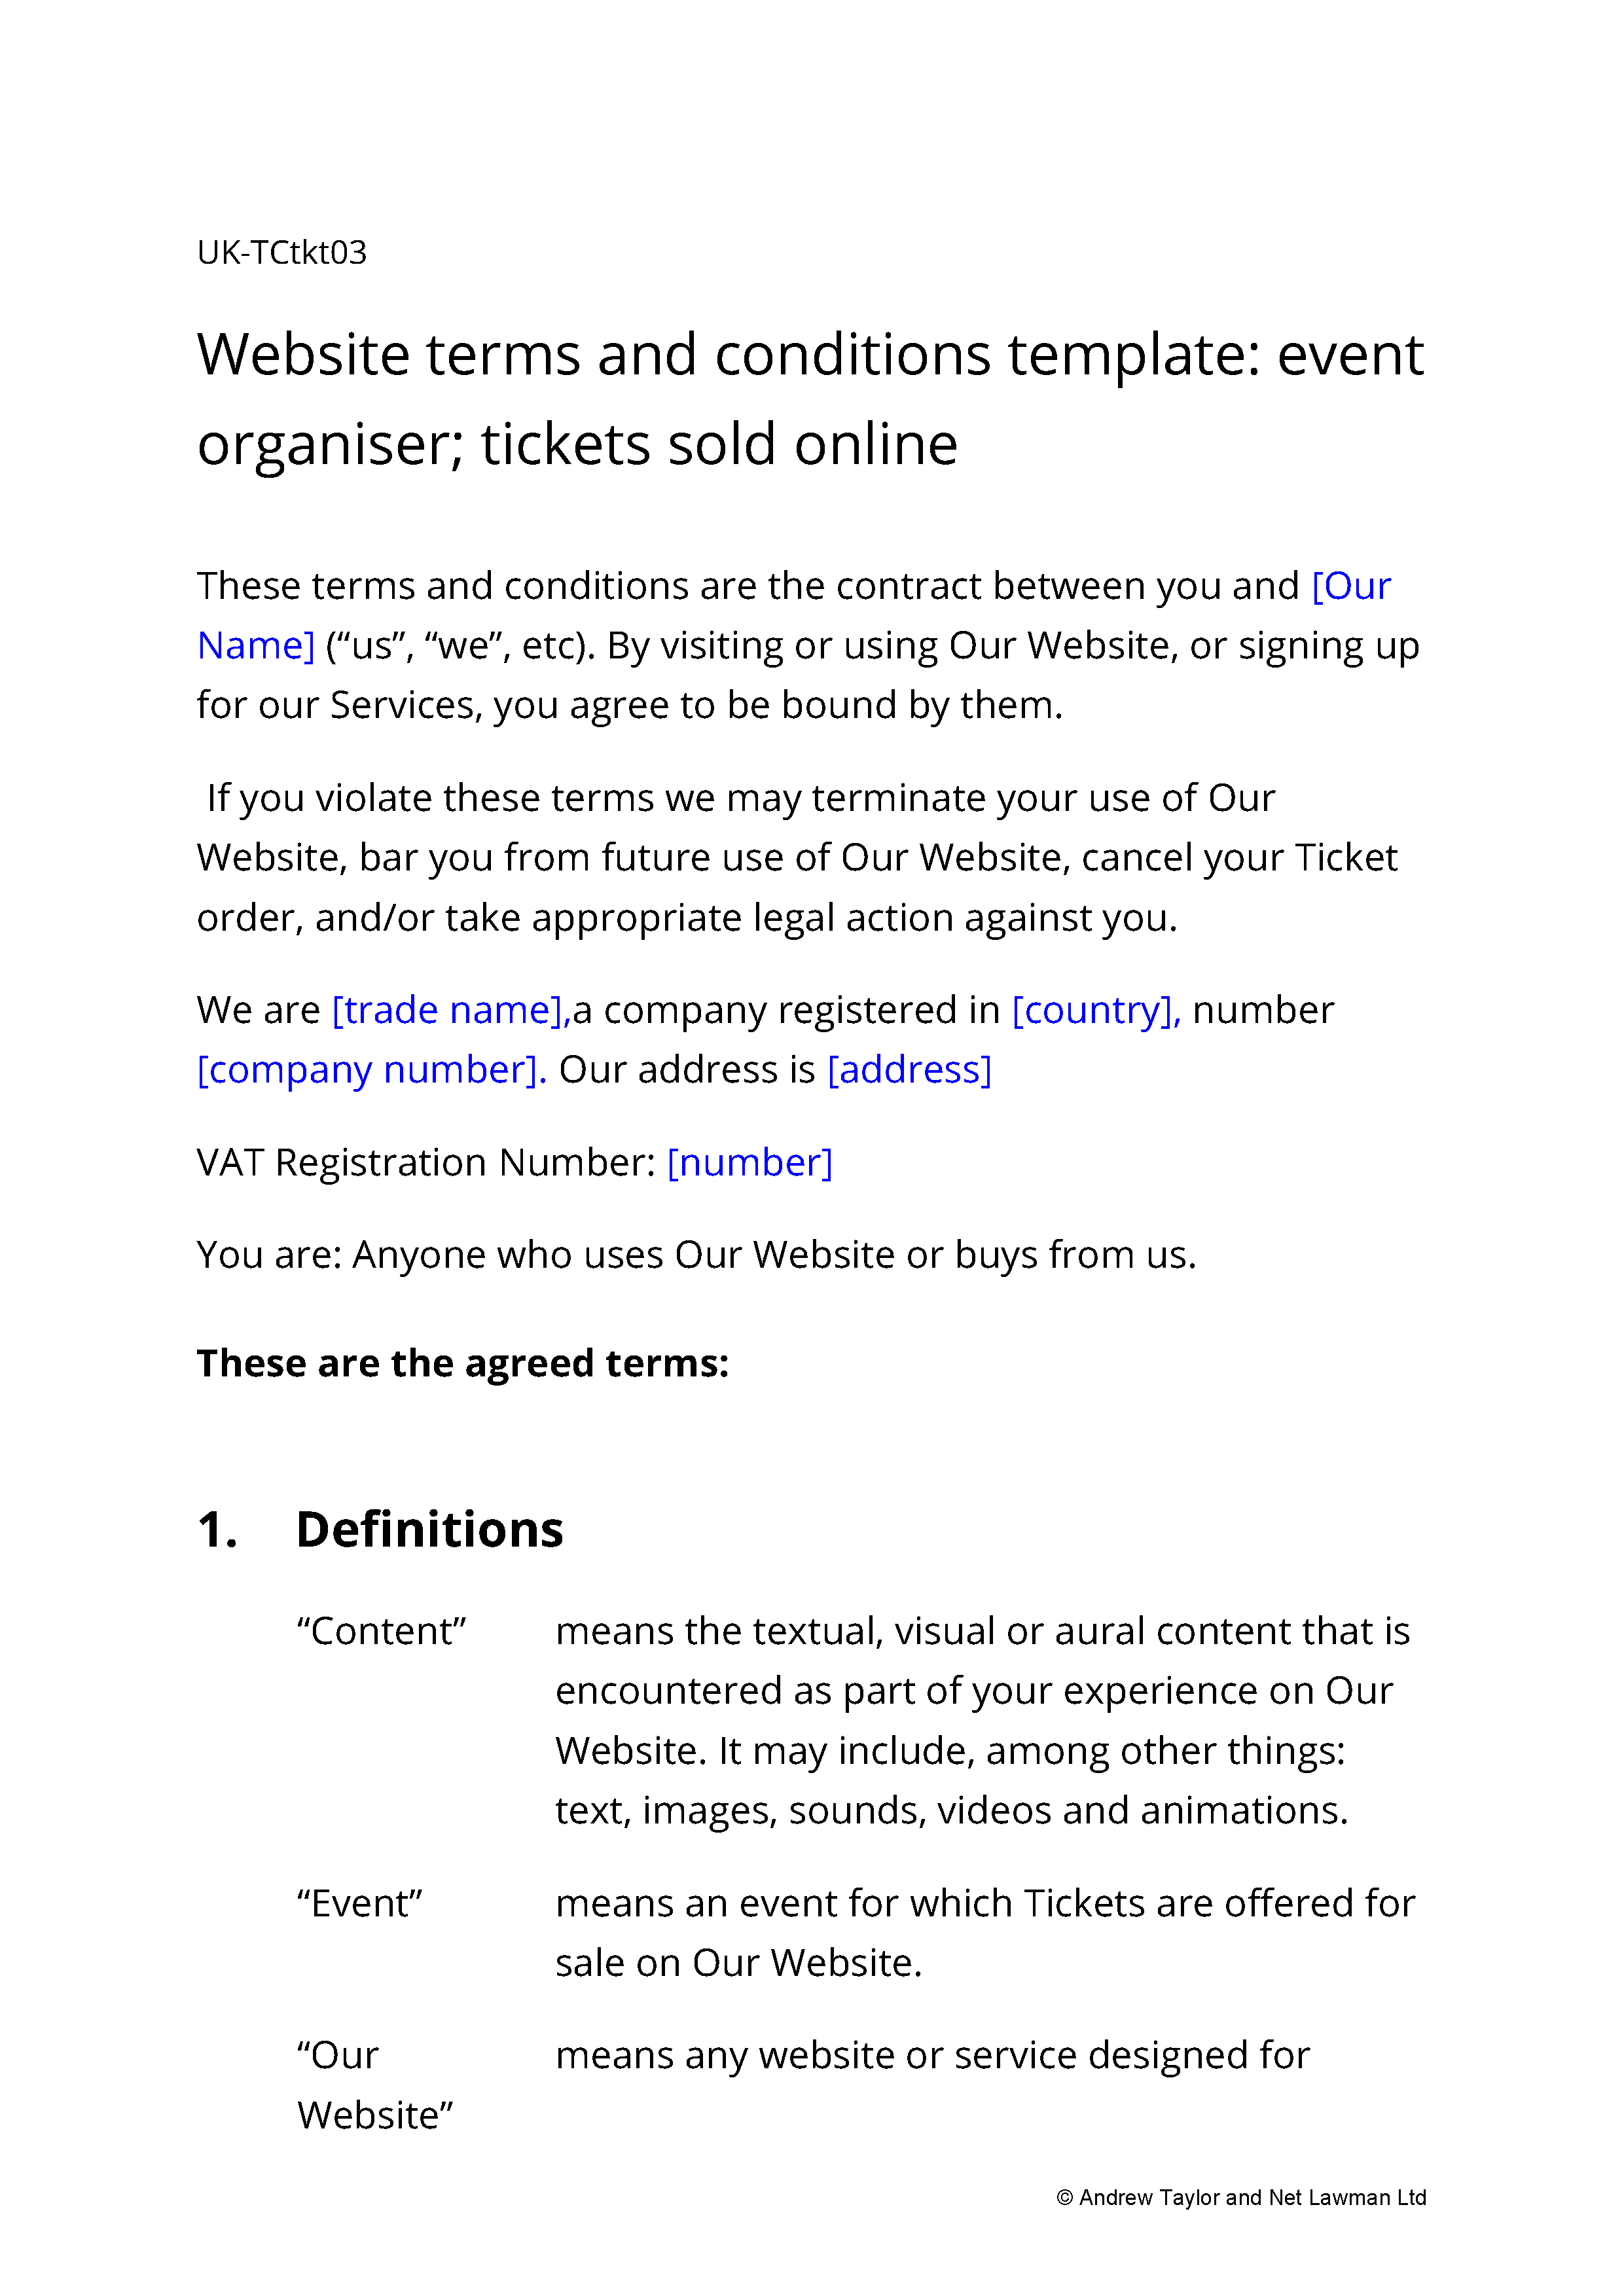 Sample page from the website terms for an event organiser